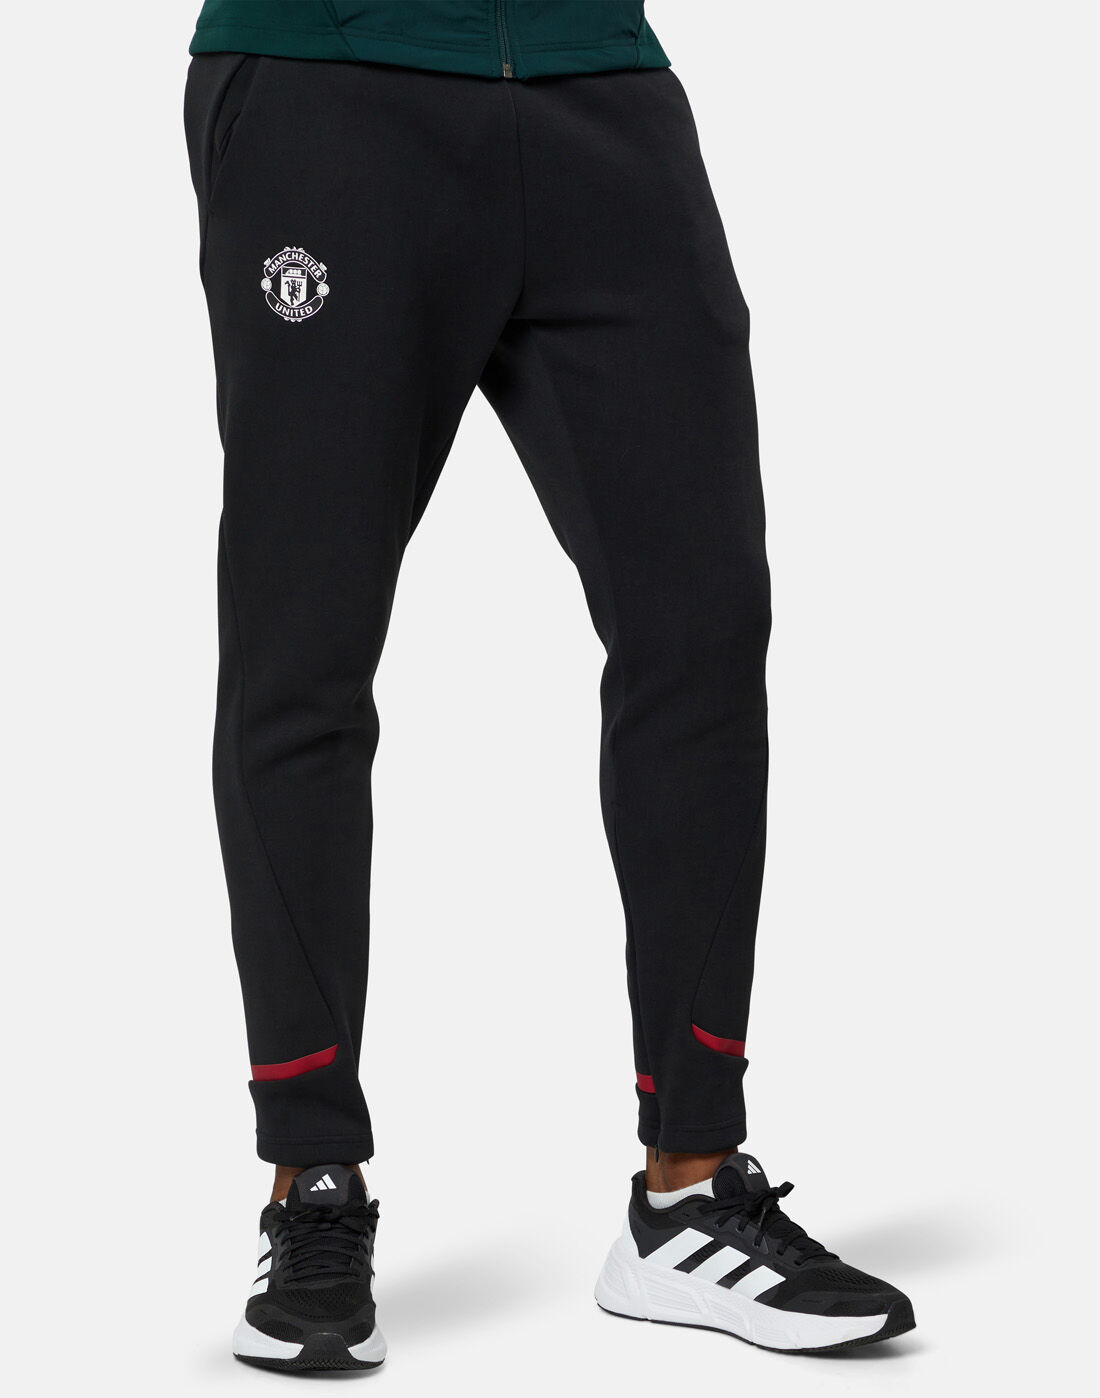 Adidas Designed For Gameday Pants, Men's Fashion, Activewear on Carousell